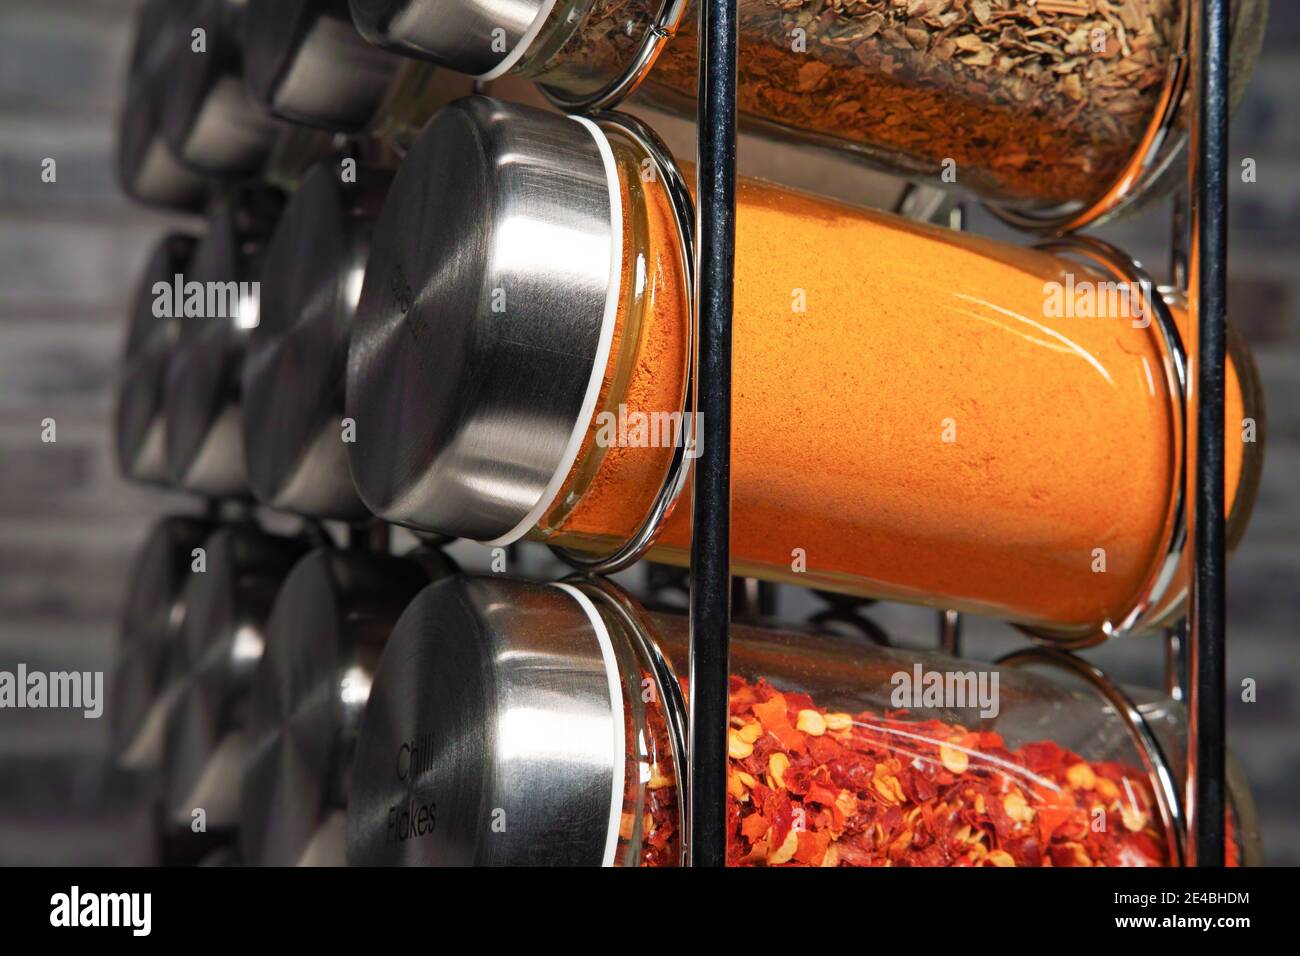 A metal spice rack with many glass bottles filled with different spices, studio shot Stock Photo